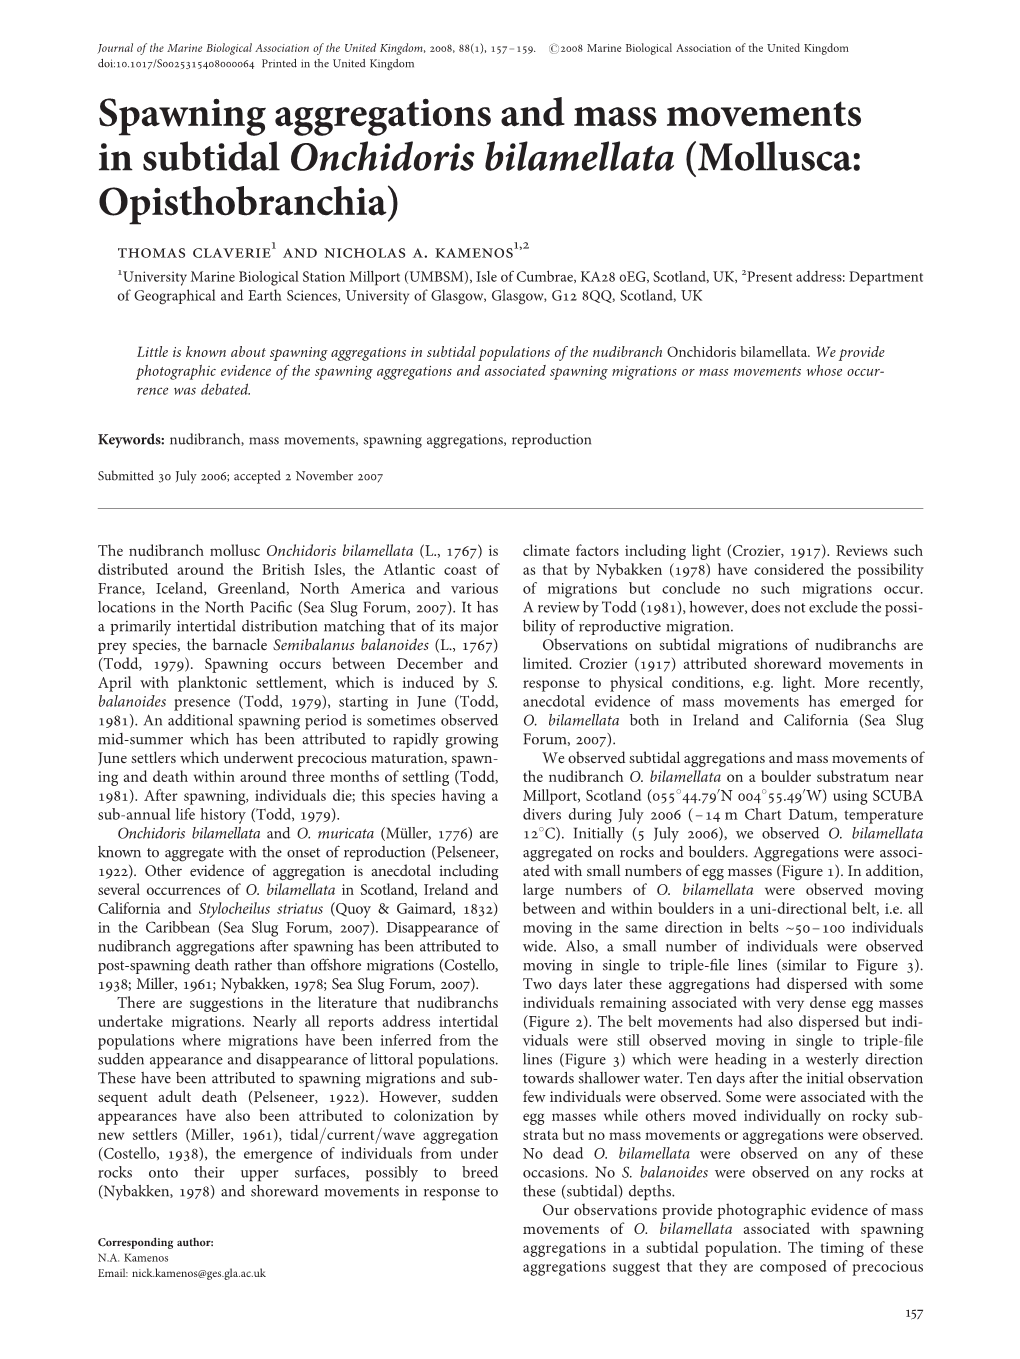 Spawning Aggregations and Mass Movements in Subtidal Onchidoris Bilamellata (Mollusca: Opisthobranchia) Thomas Claverie1 and Nicholas A